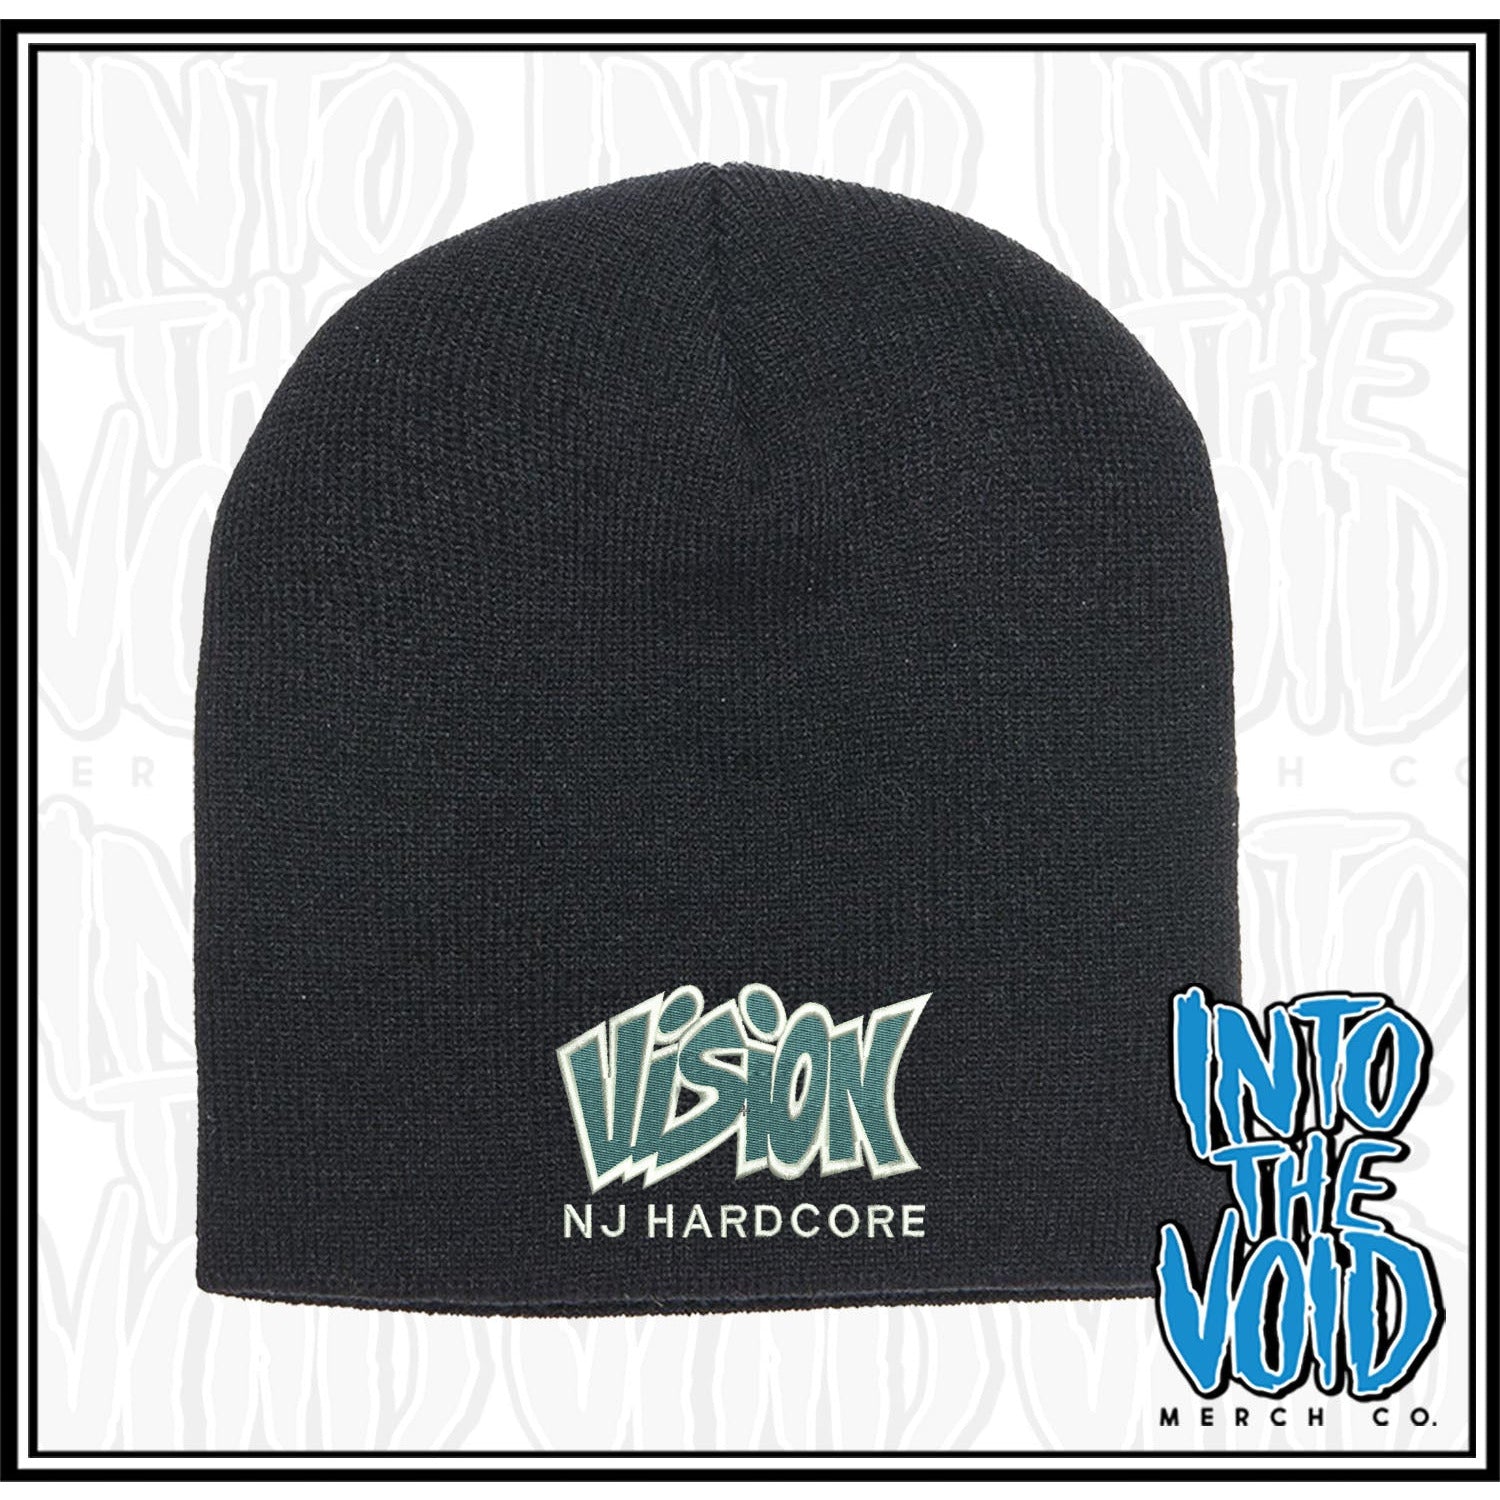 VISION - NJ HARDCORE - EMBROIDERED BEANIE - INTO THE VOID Merch Co.